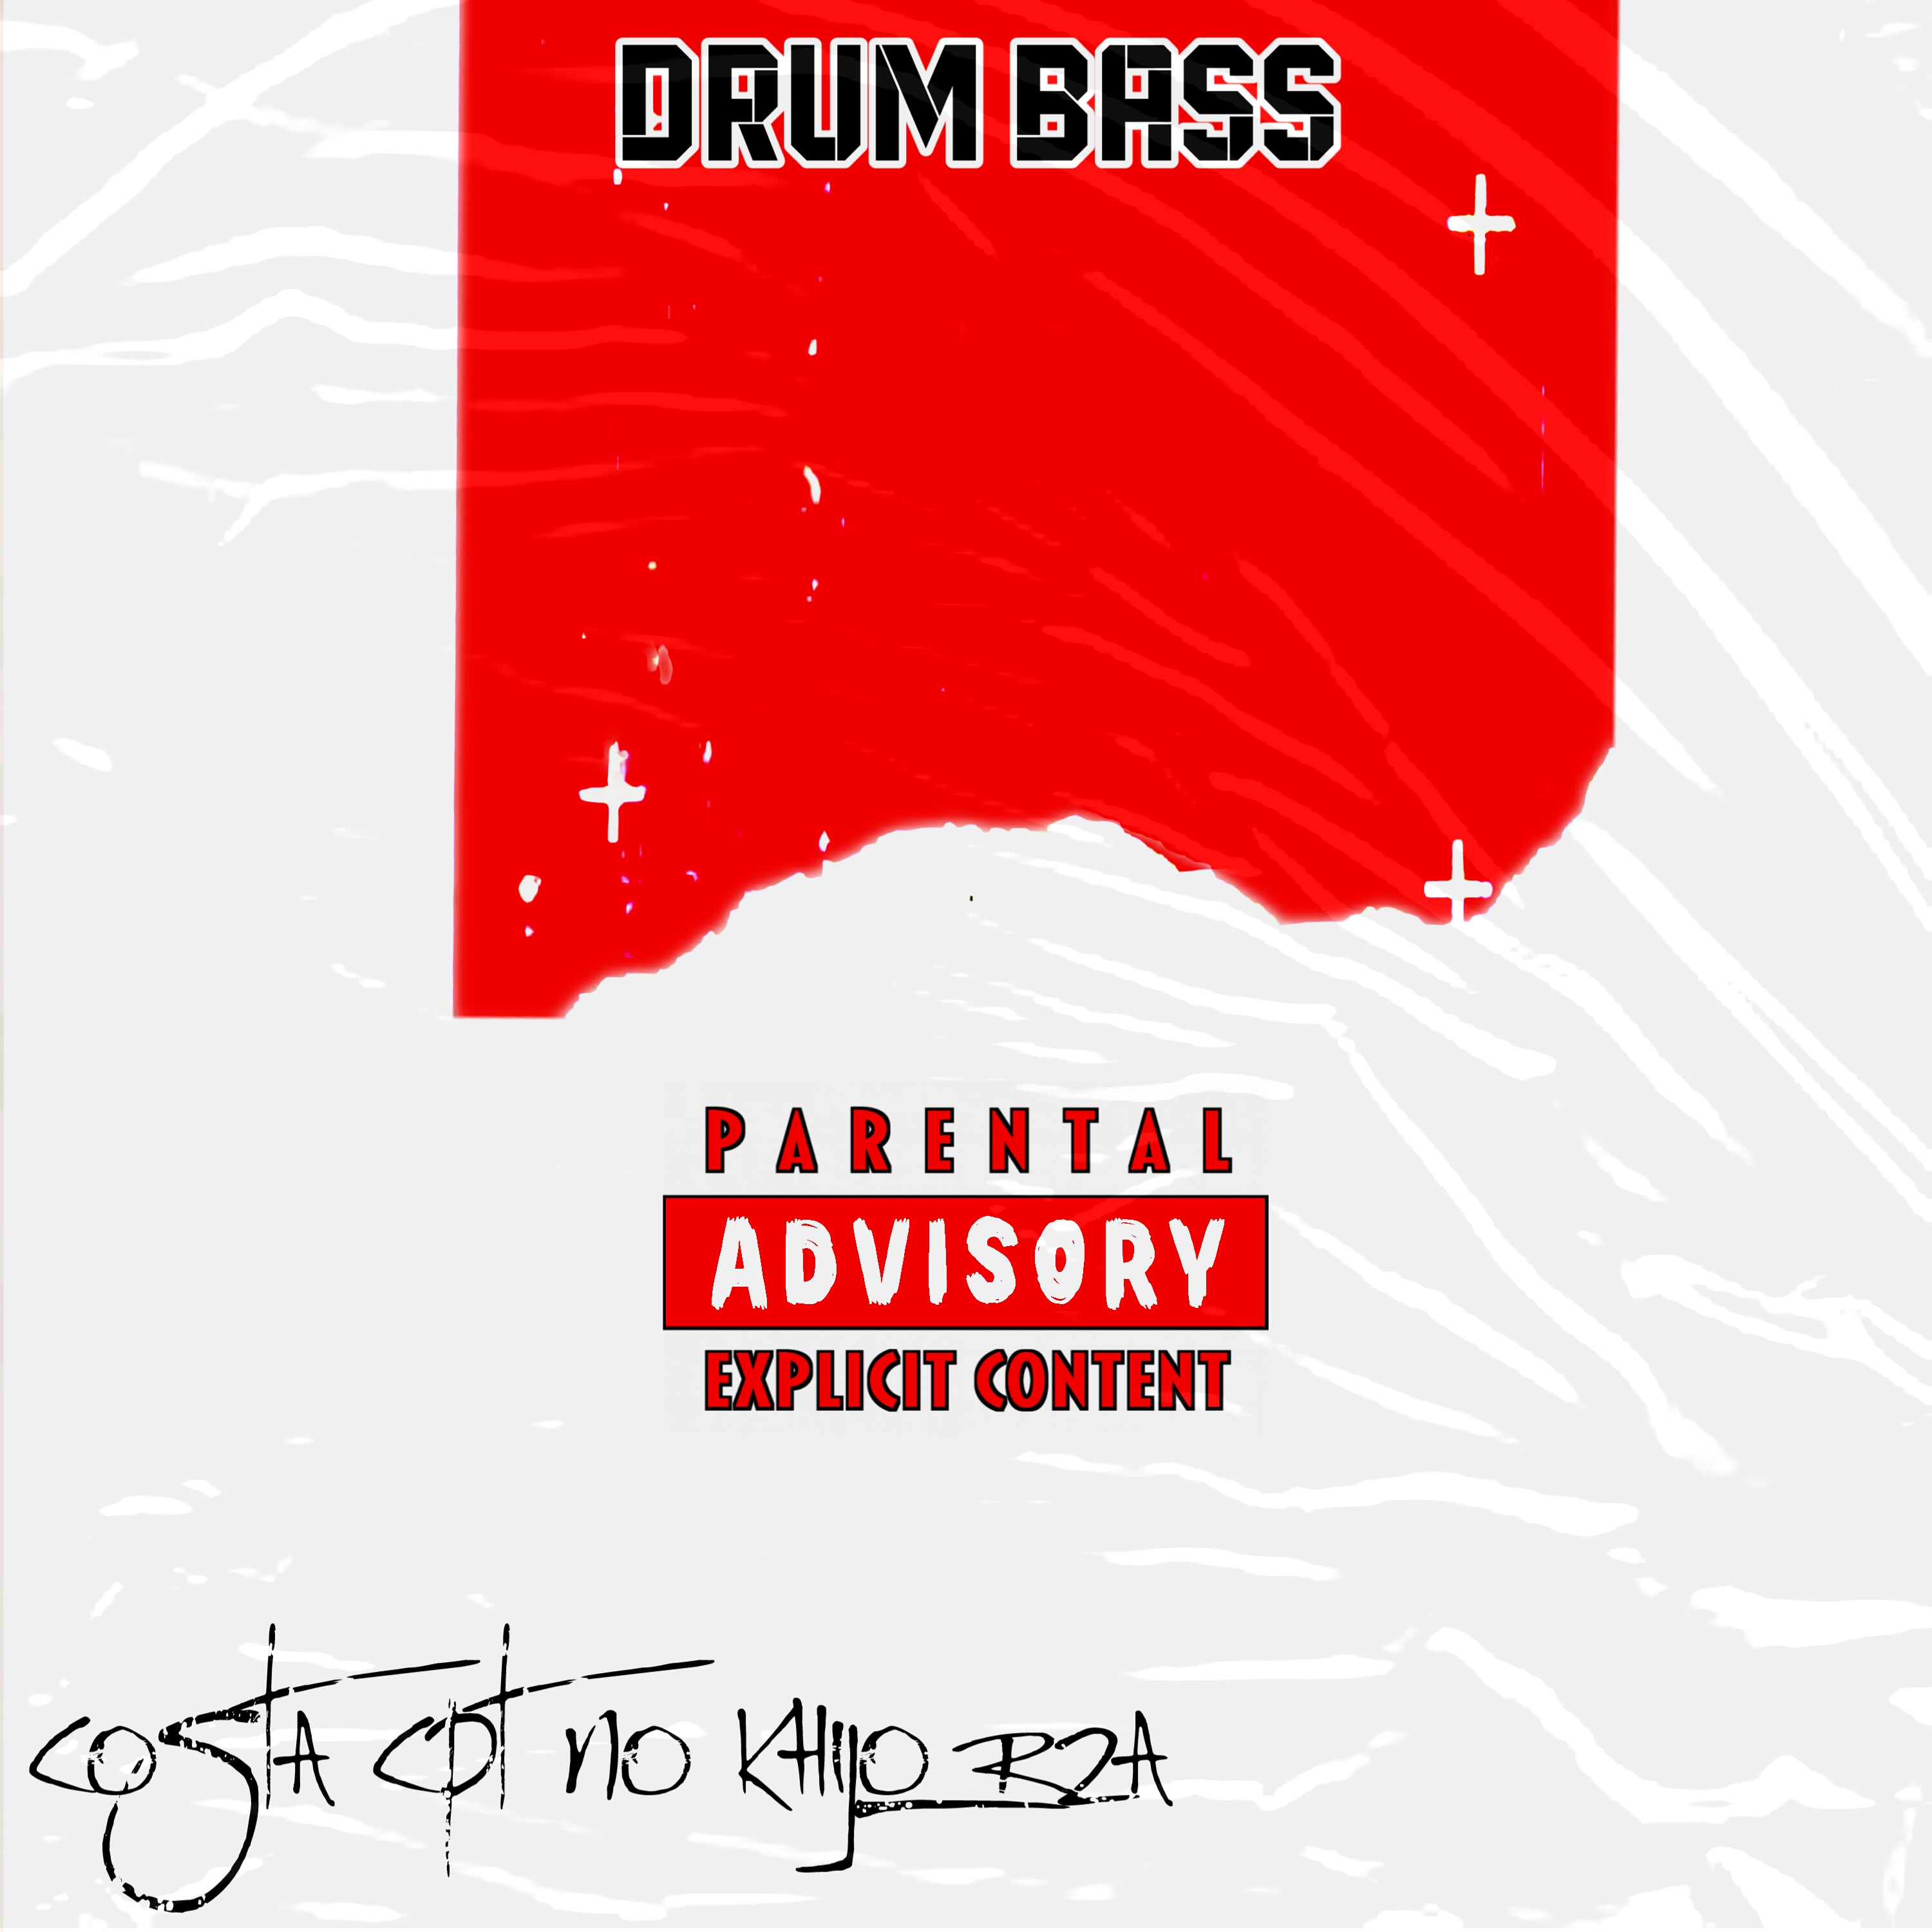 DRUM BASS - COSTA CPT NO KHIJO_RZA